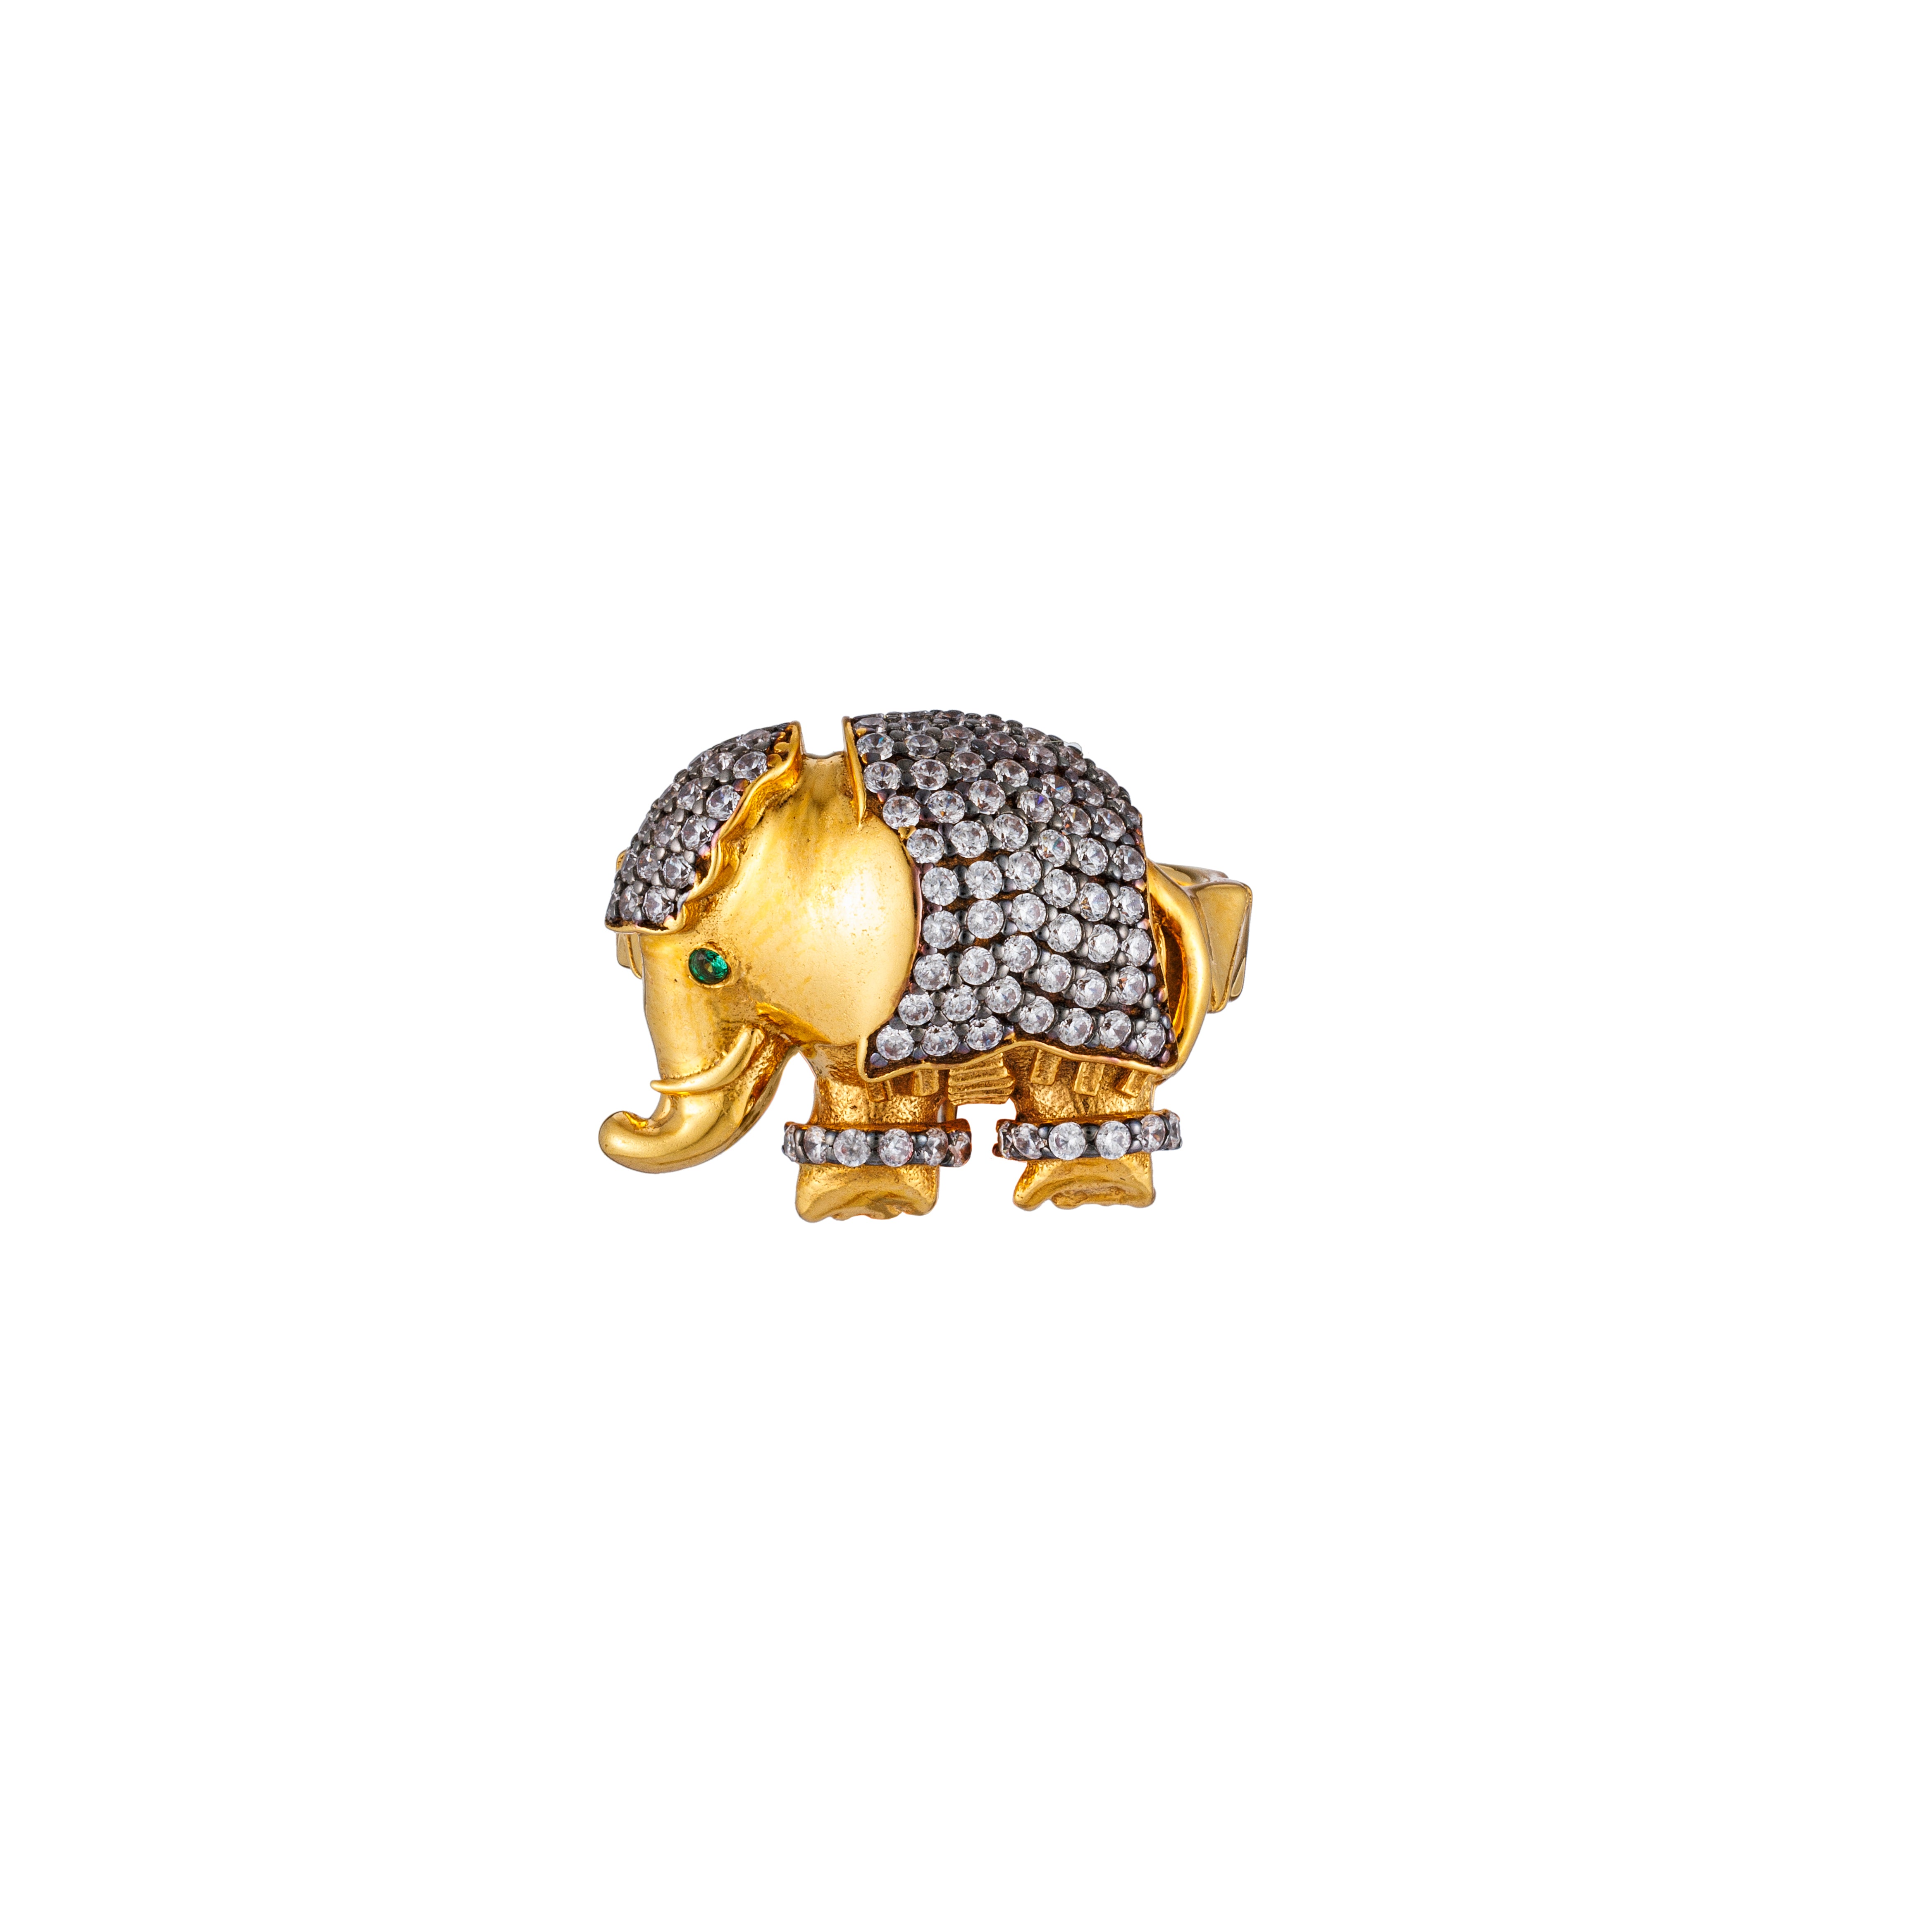 Cartier Vintage Elephant Ring - 18K Yellow Gold Band, Rings - CRT52855 |  The RealReal